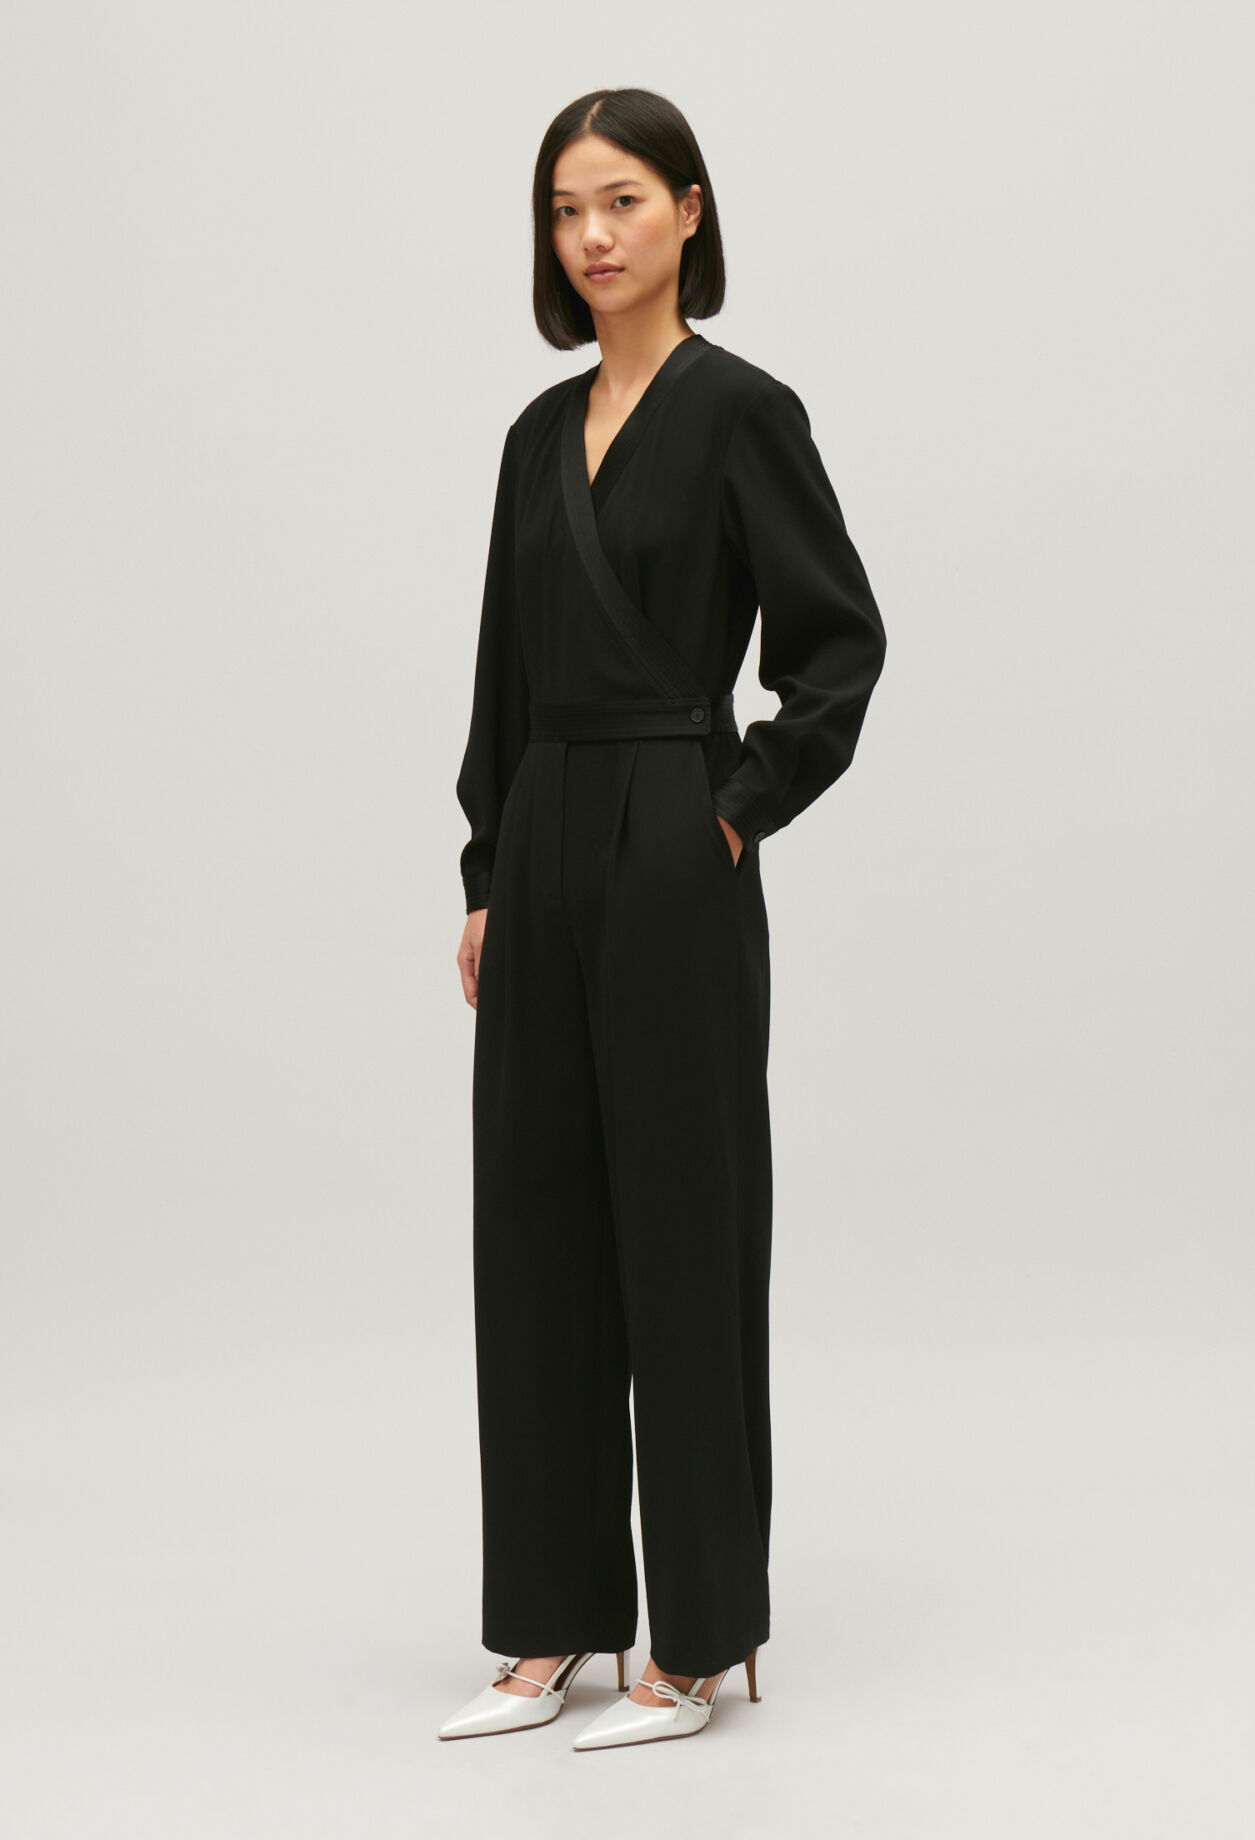 ASOS LUXE asymmetric one sleeve diamante cut out jumpsuit in black | ASOS